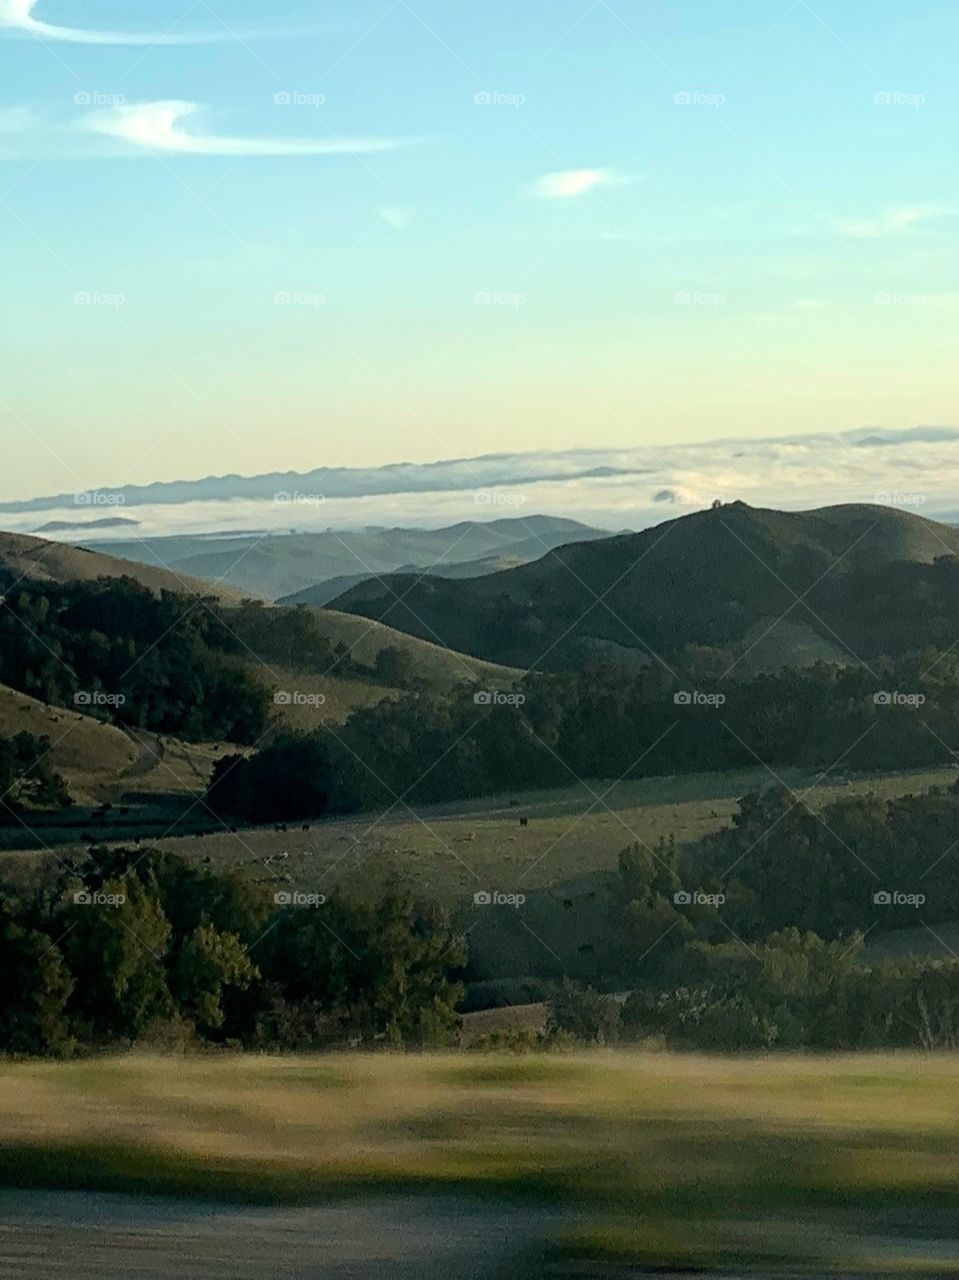 Above the clouds in SLO county